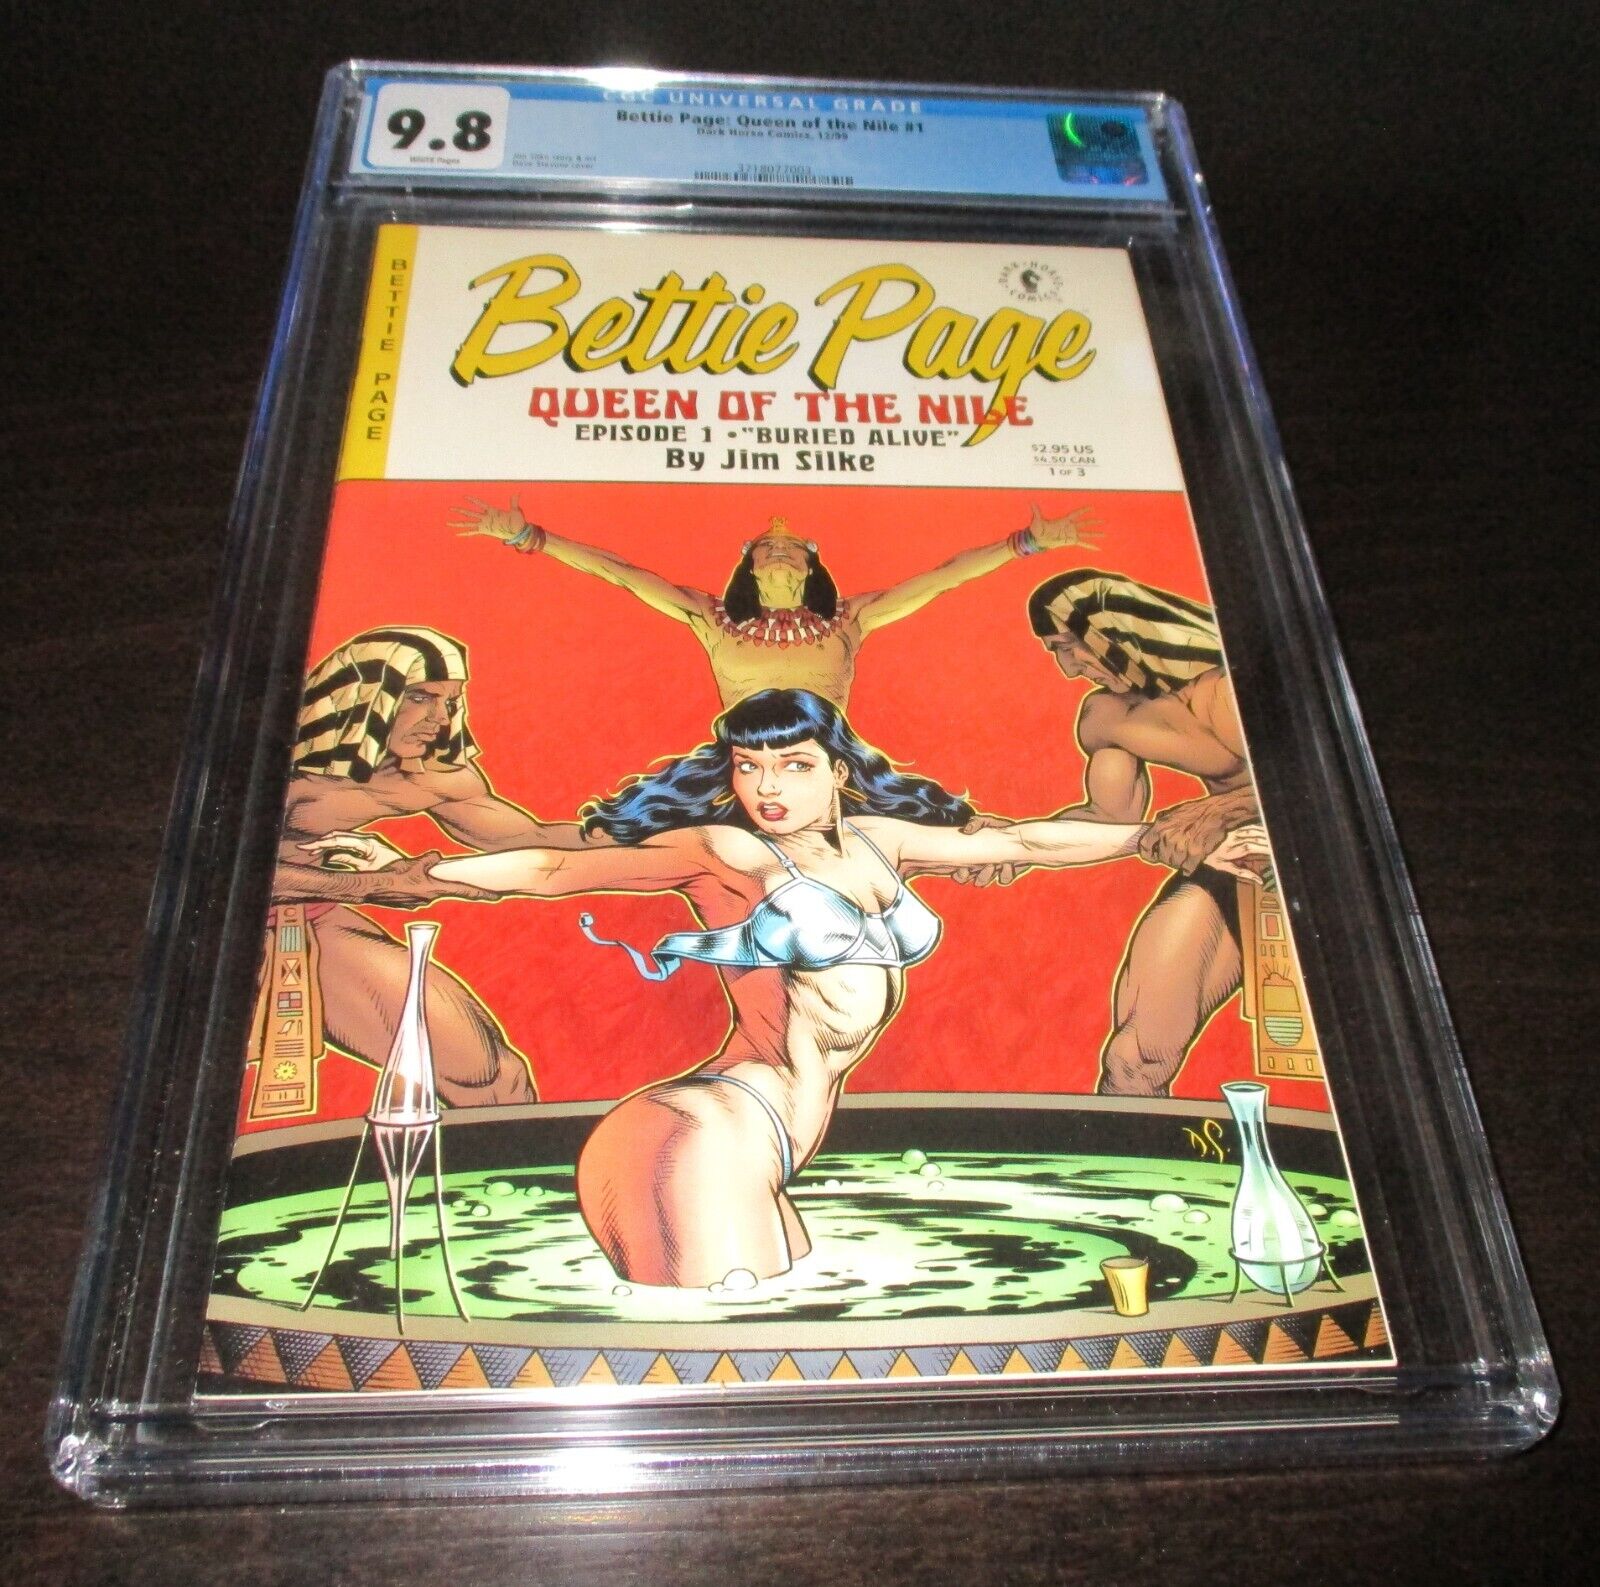 BETTIE PAGE QUEEN OF THE NILE #1 1999 CGC 9.8 DAVE STEPHENS COVER